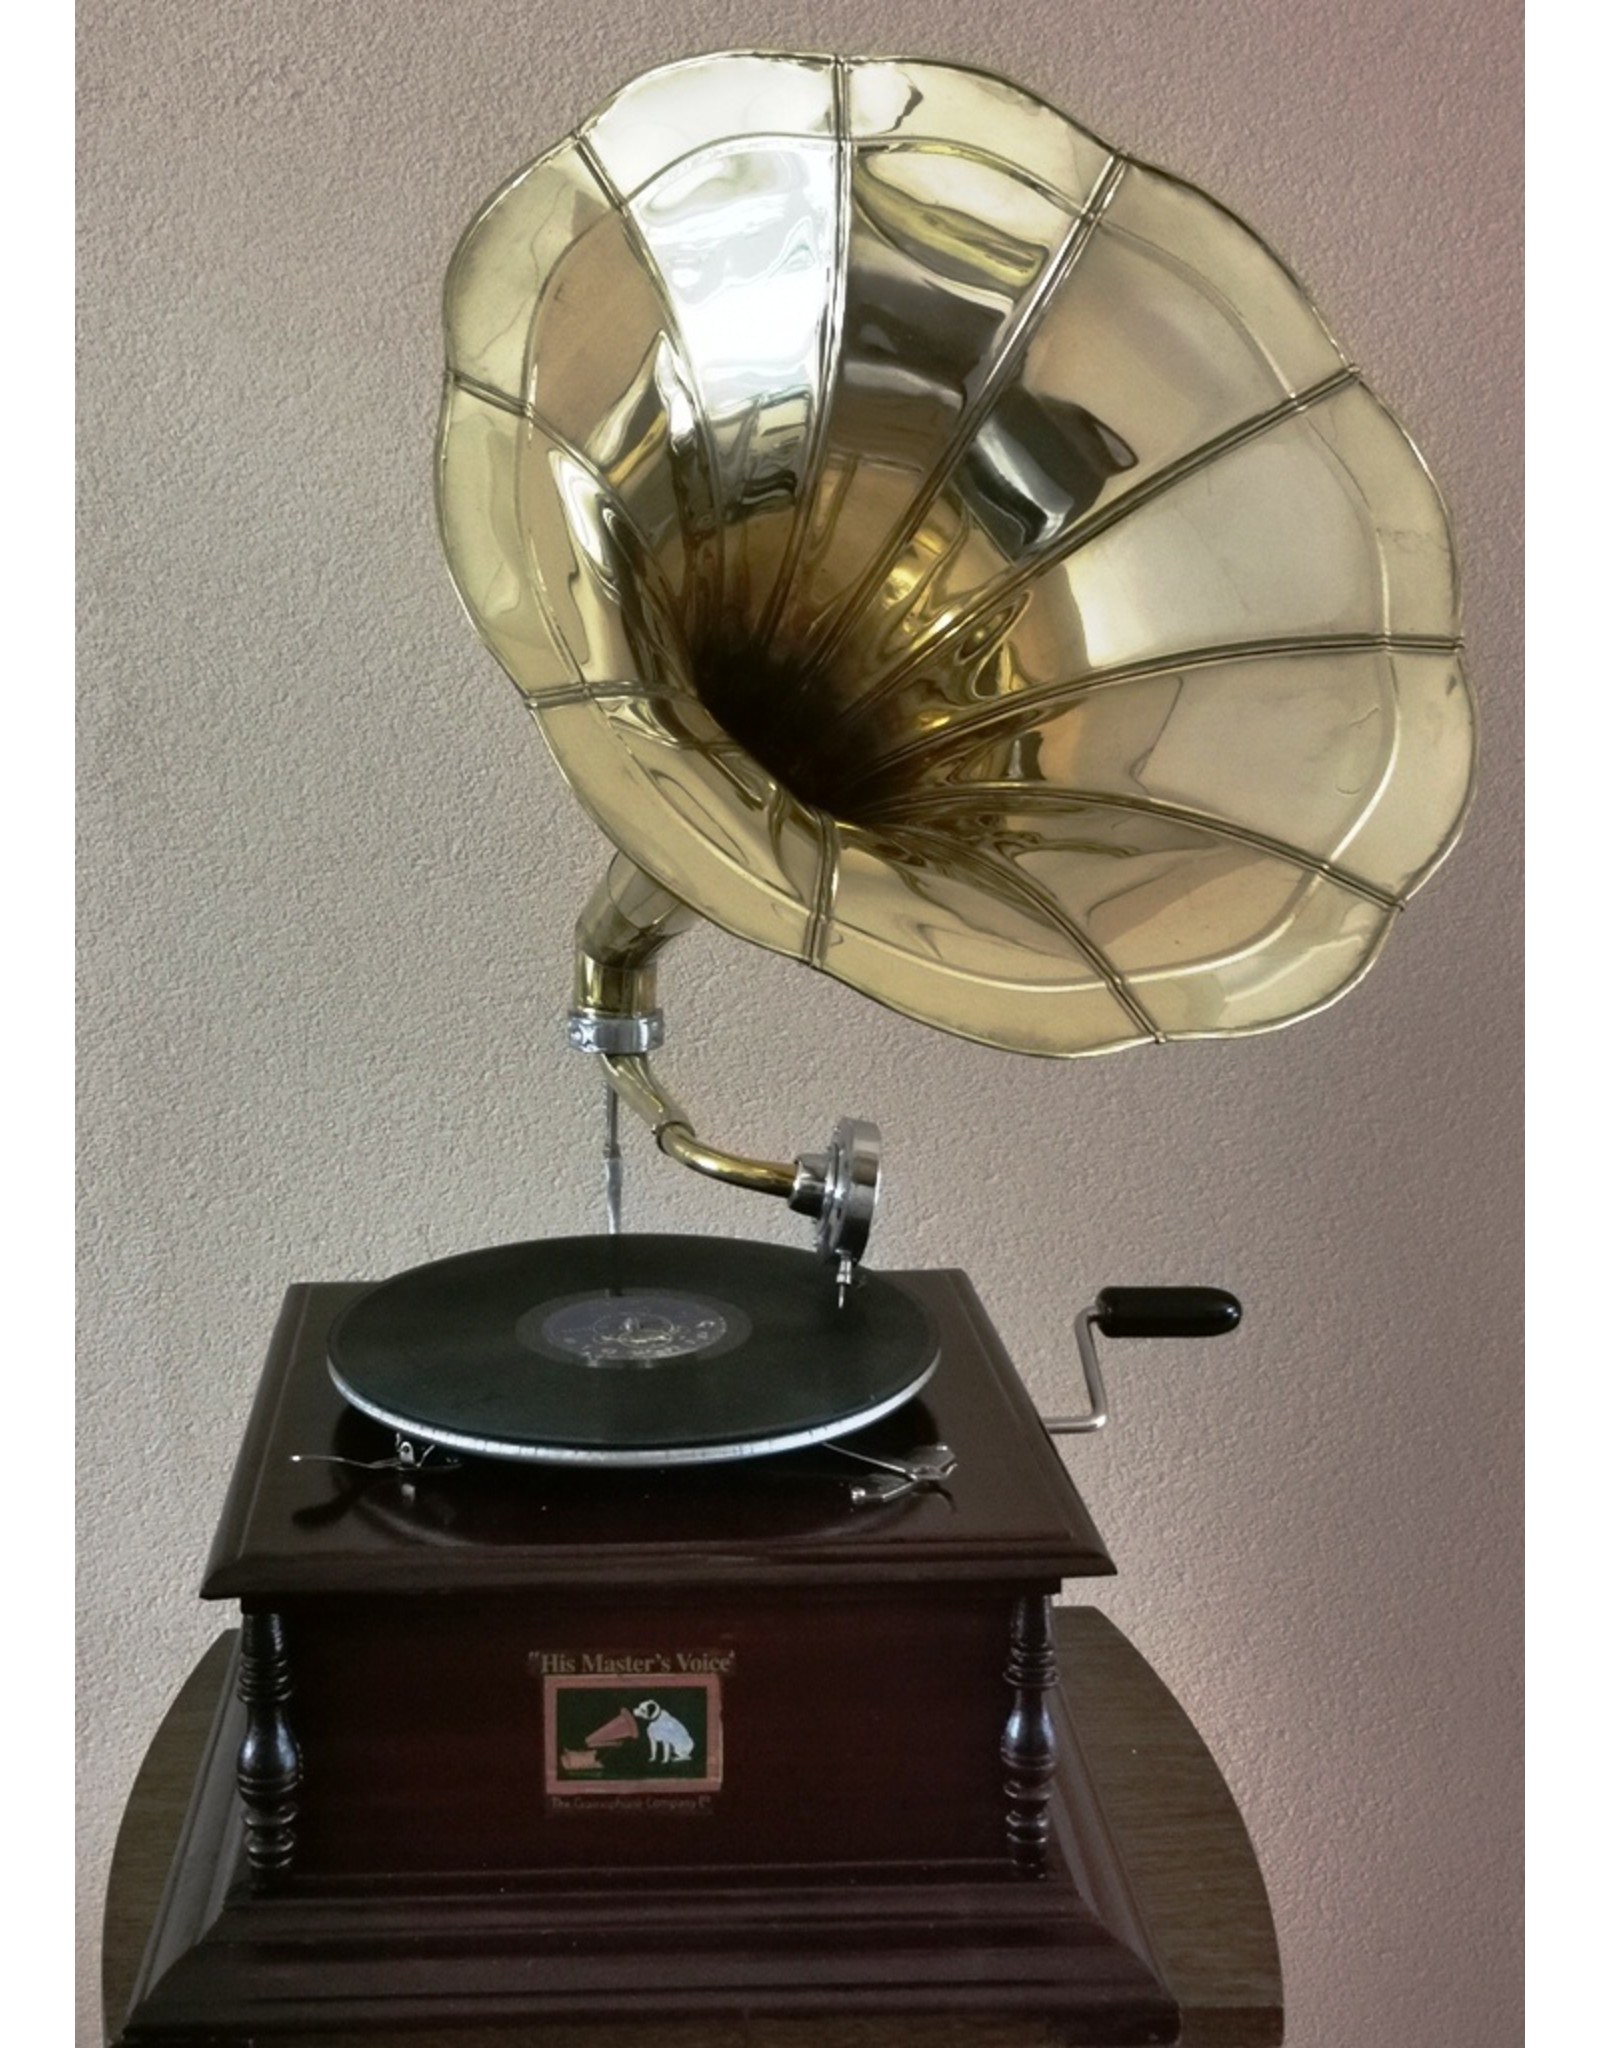 Trukado Miscellaneous - Gramophone - Old-fashioned record player with horn